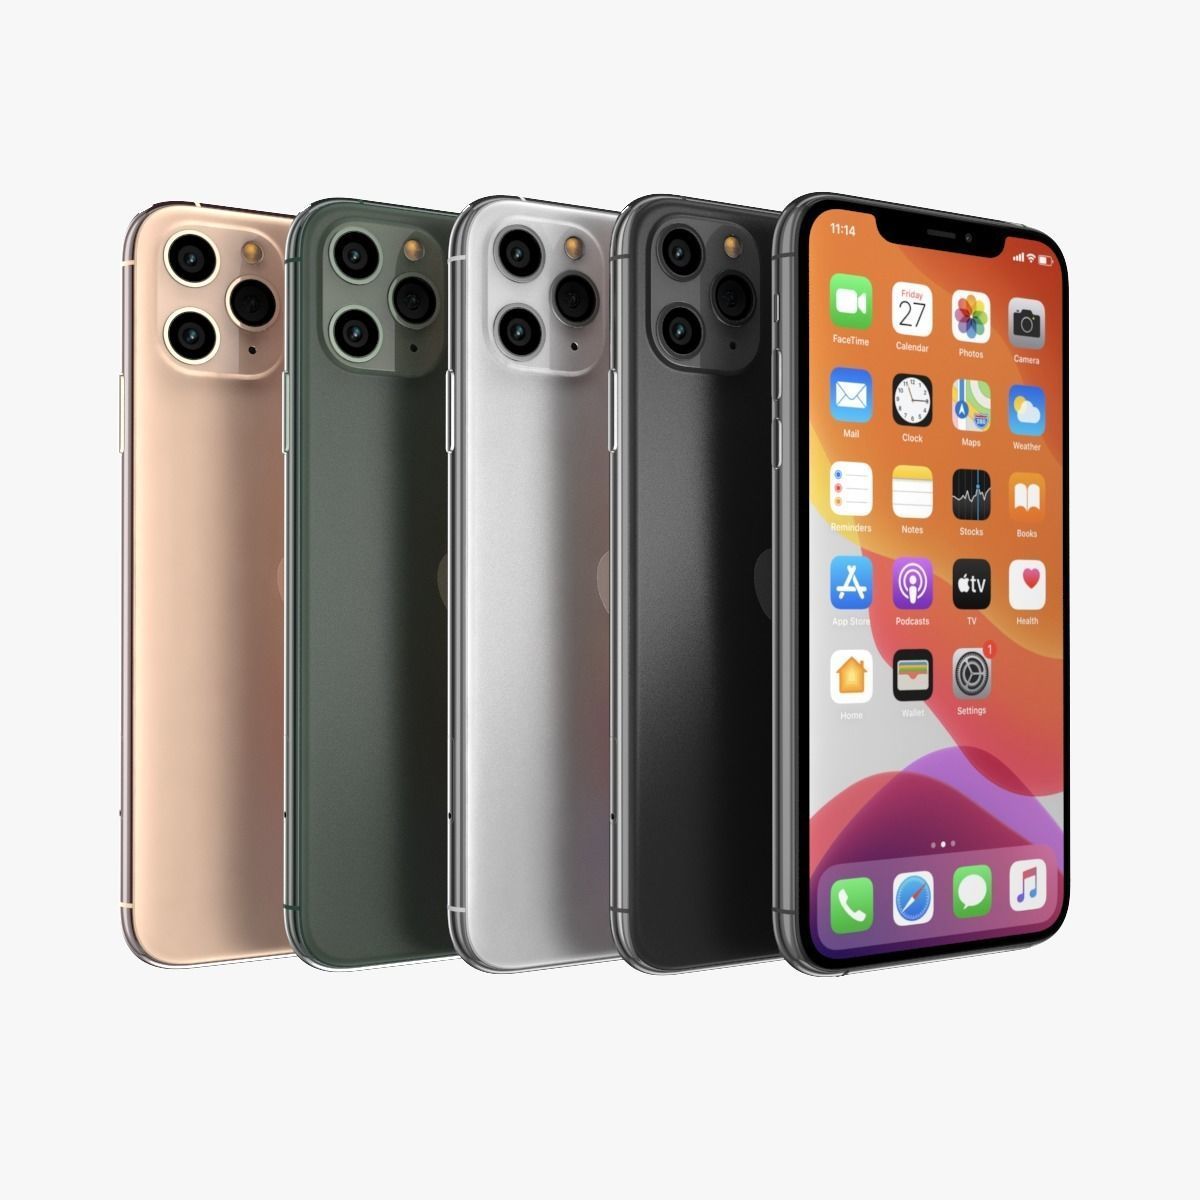 Apple iPhone 11 Pro – caygadgets